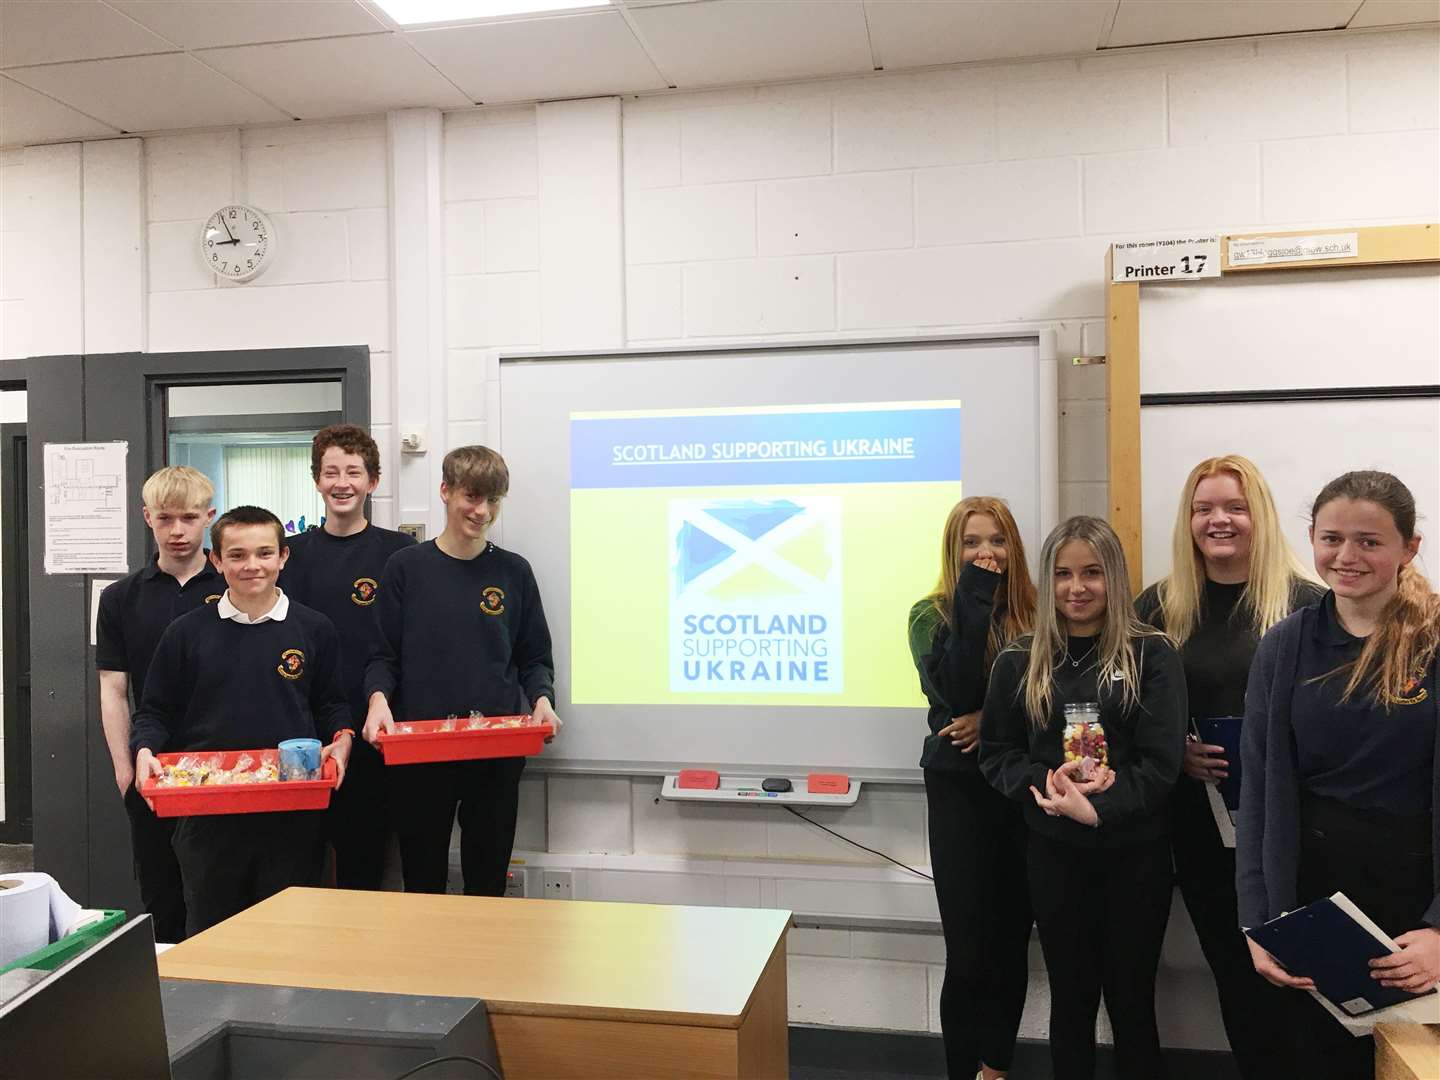 Class 4.4 at Meldrum Academy come together for the cause